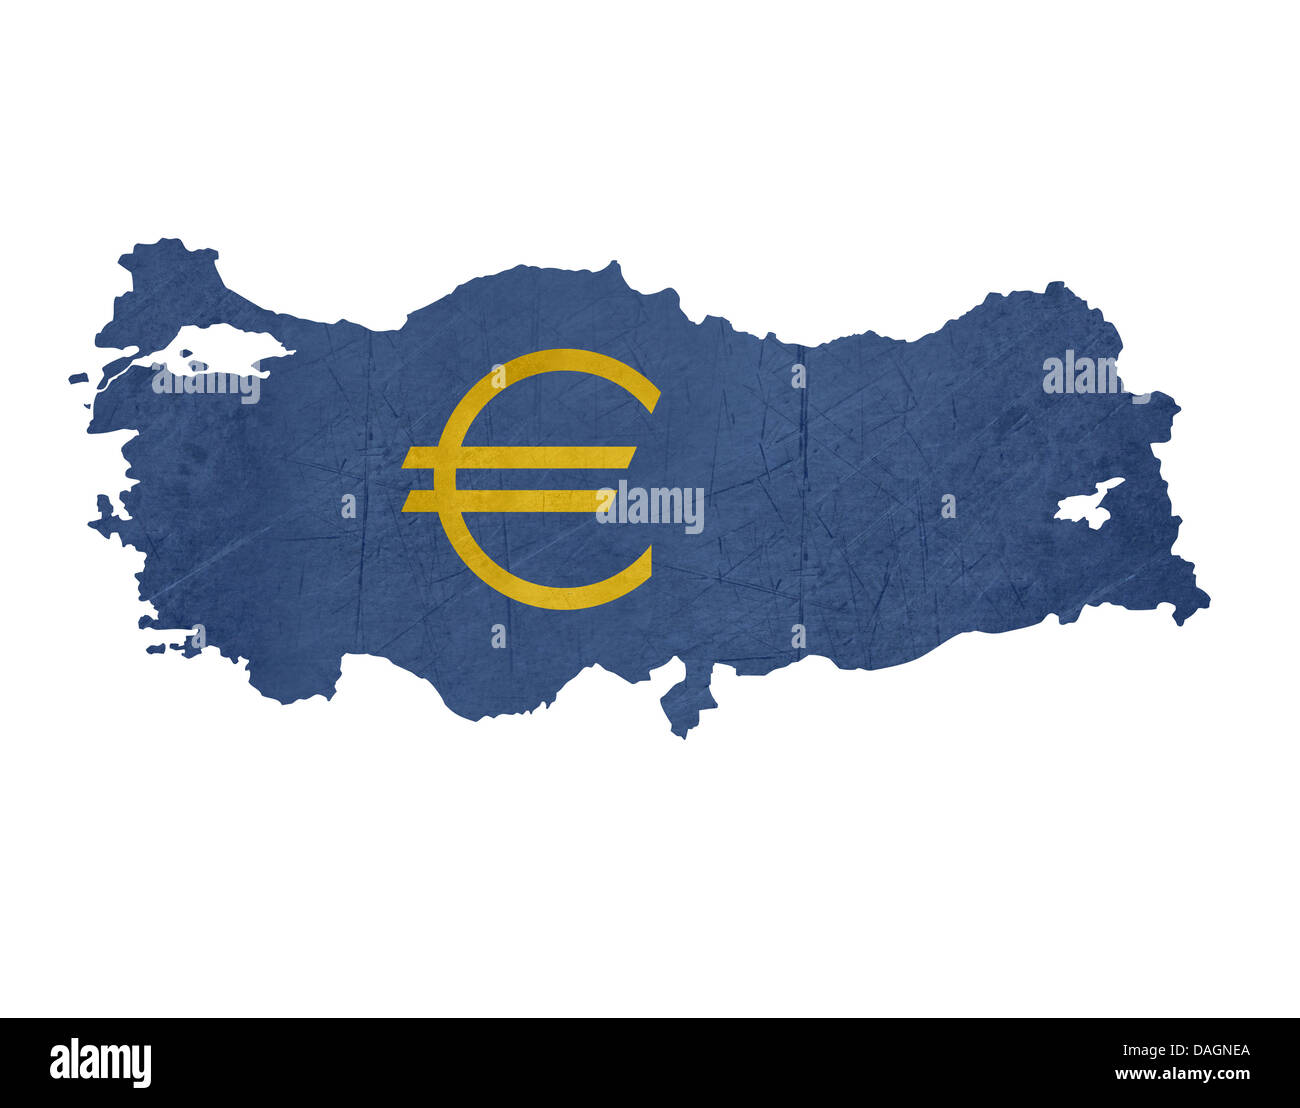 European currency symbol on map of Turkey isolated on white background. Stock Photo